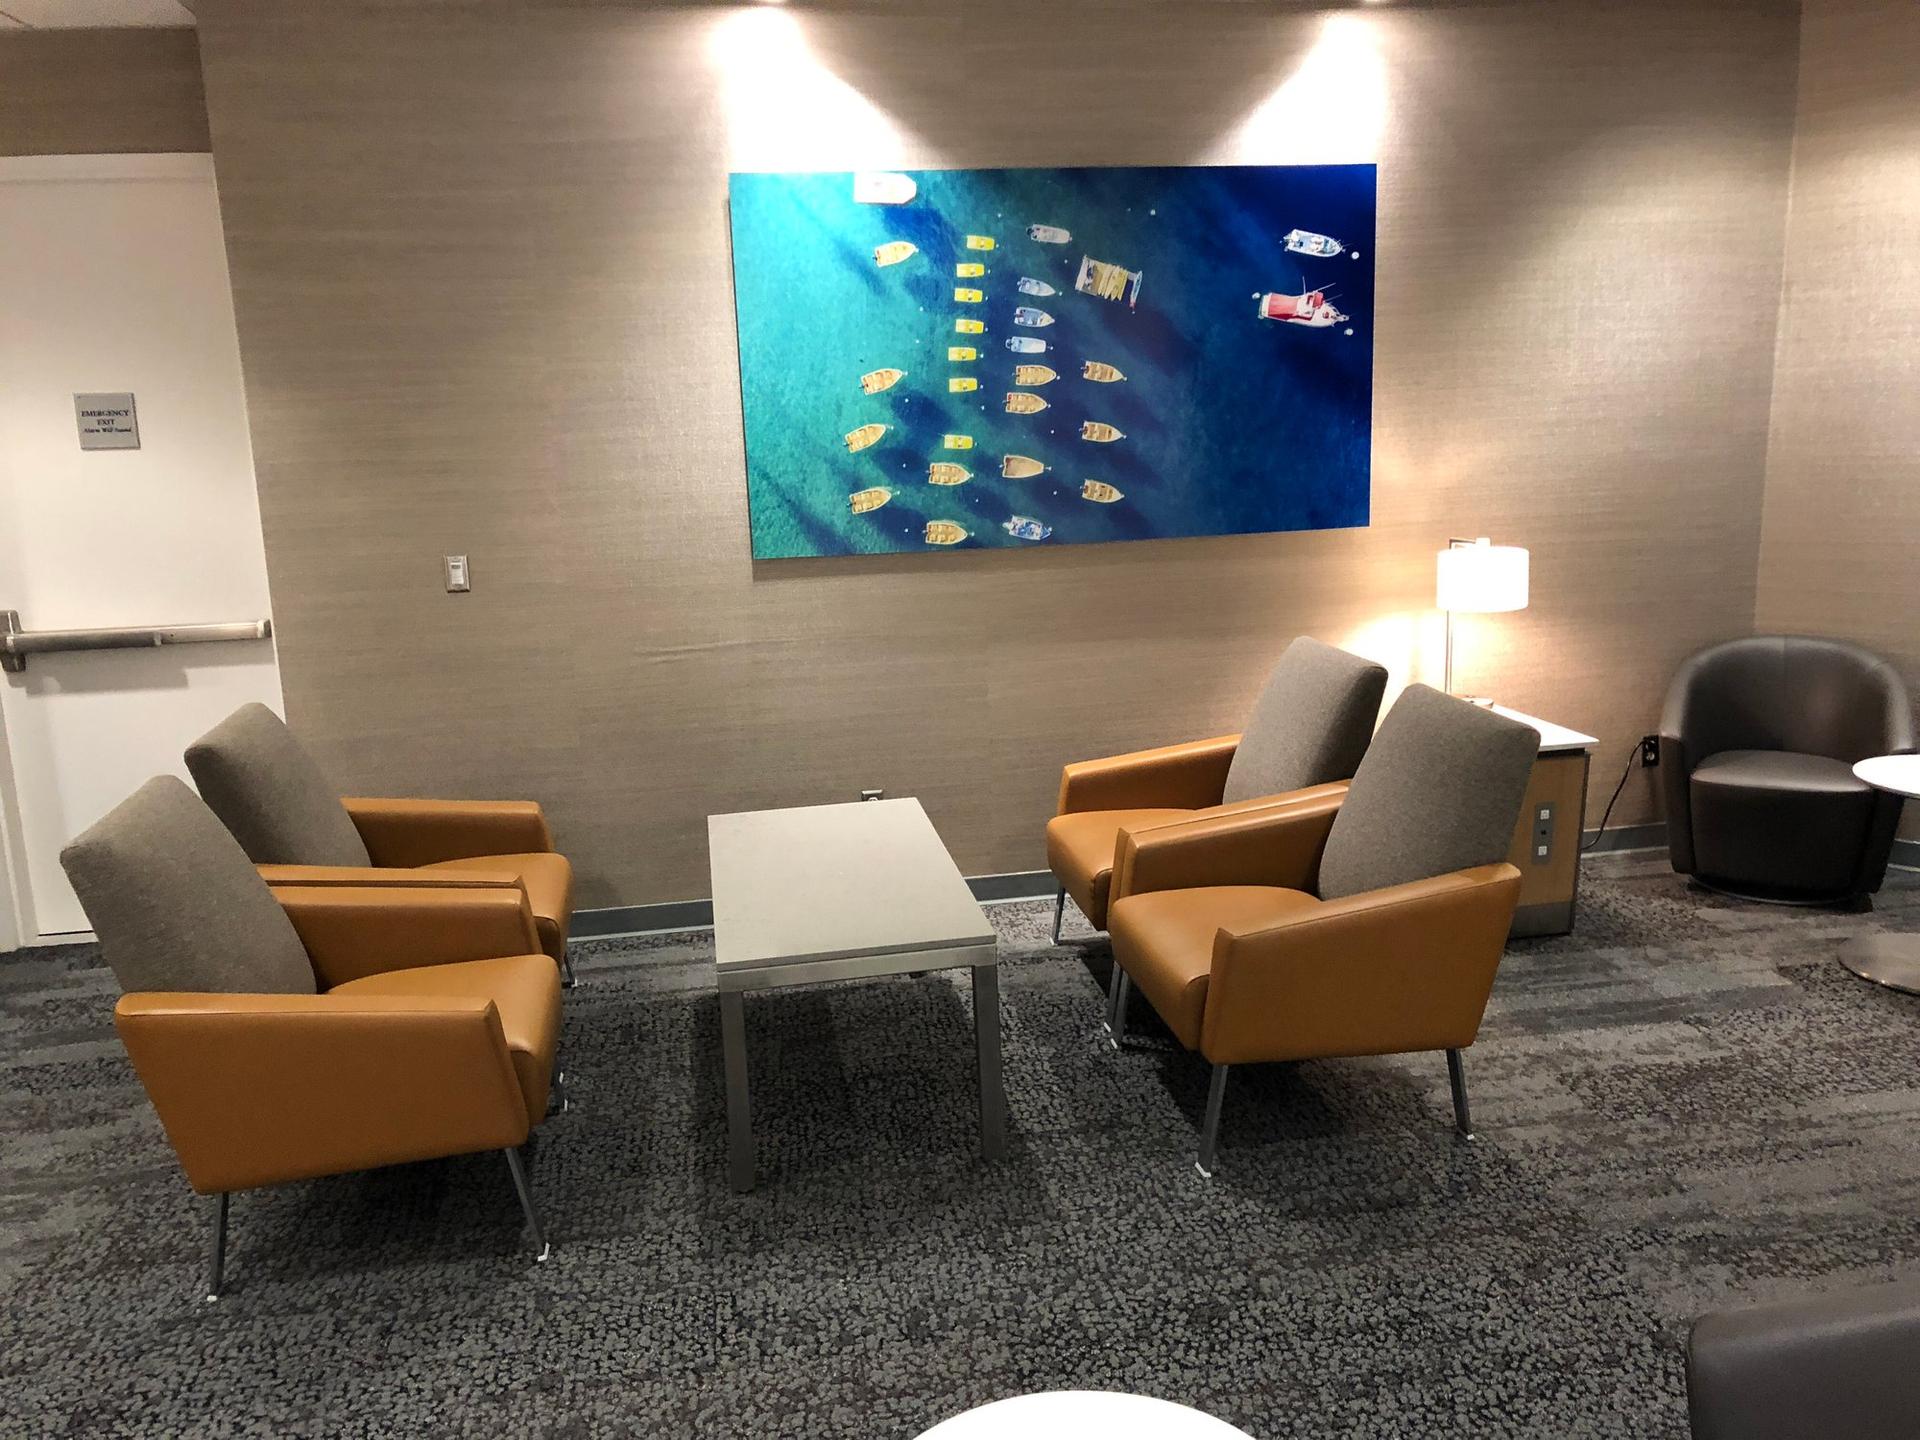 American Airlines Admirals Club image 31 of 38